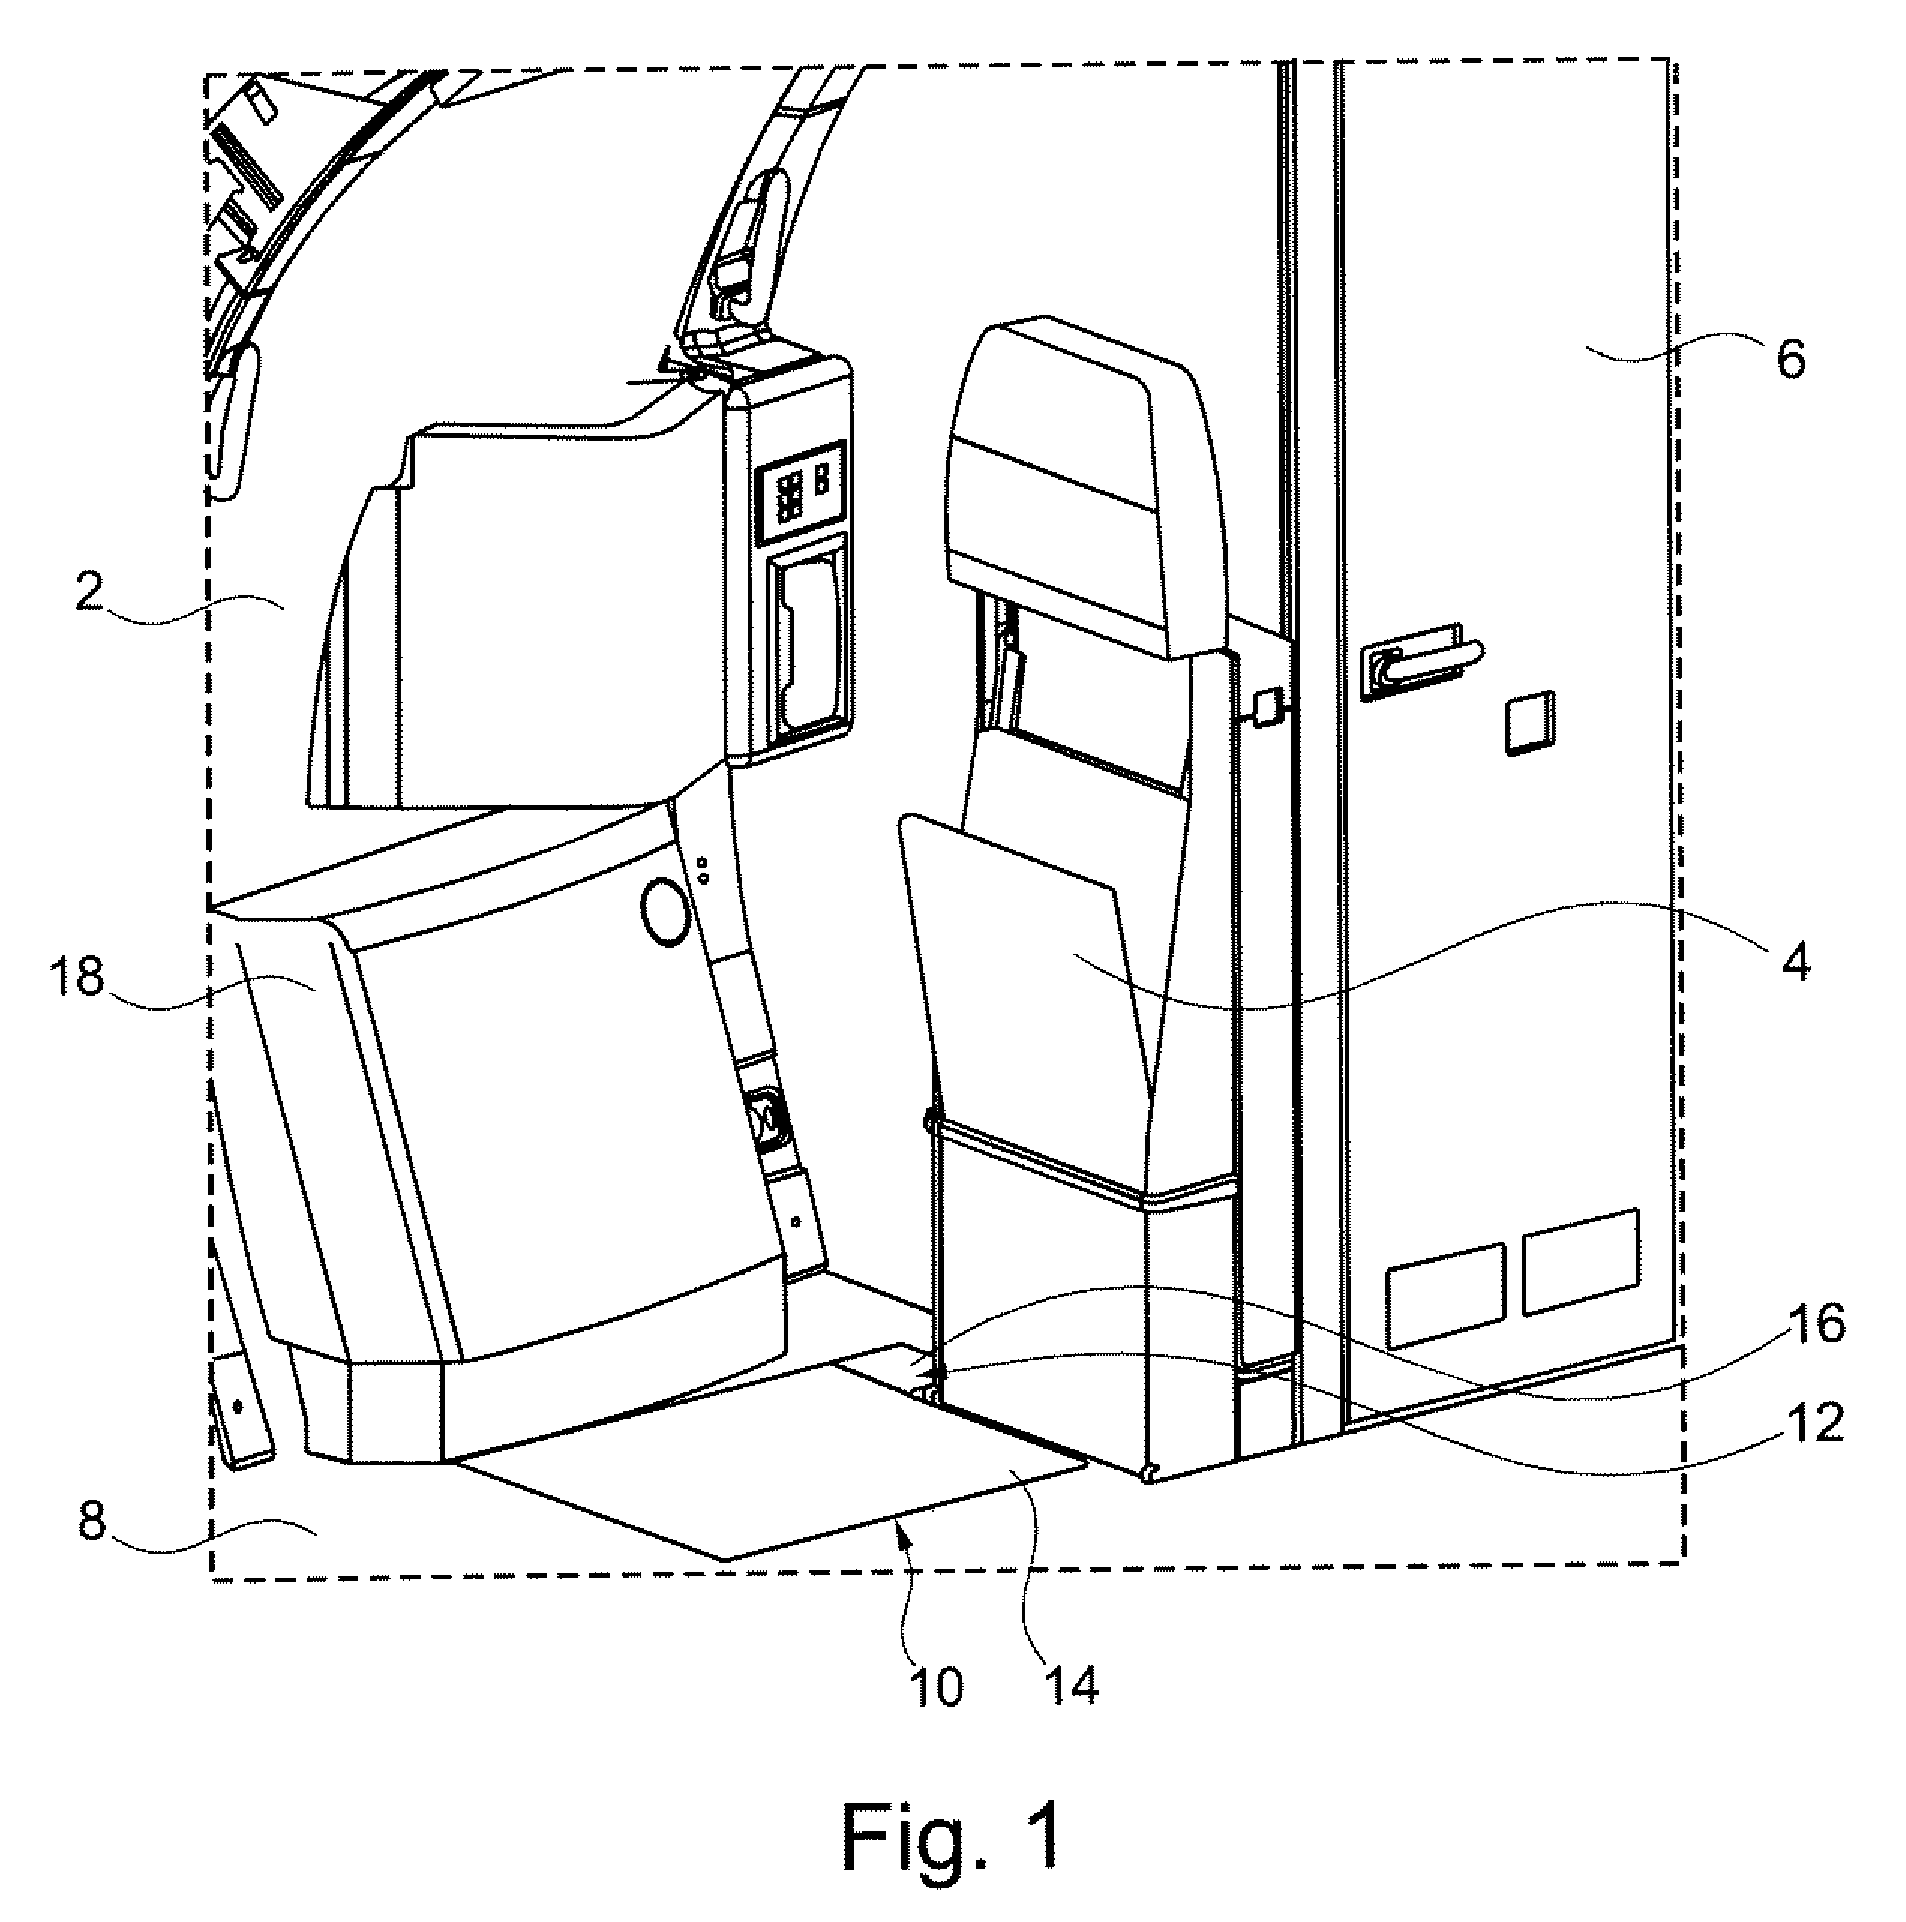 Assembly and method for stowing away and removing a survival kit in a passenger cabin of an aircraft